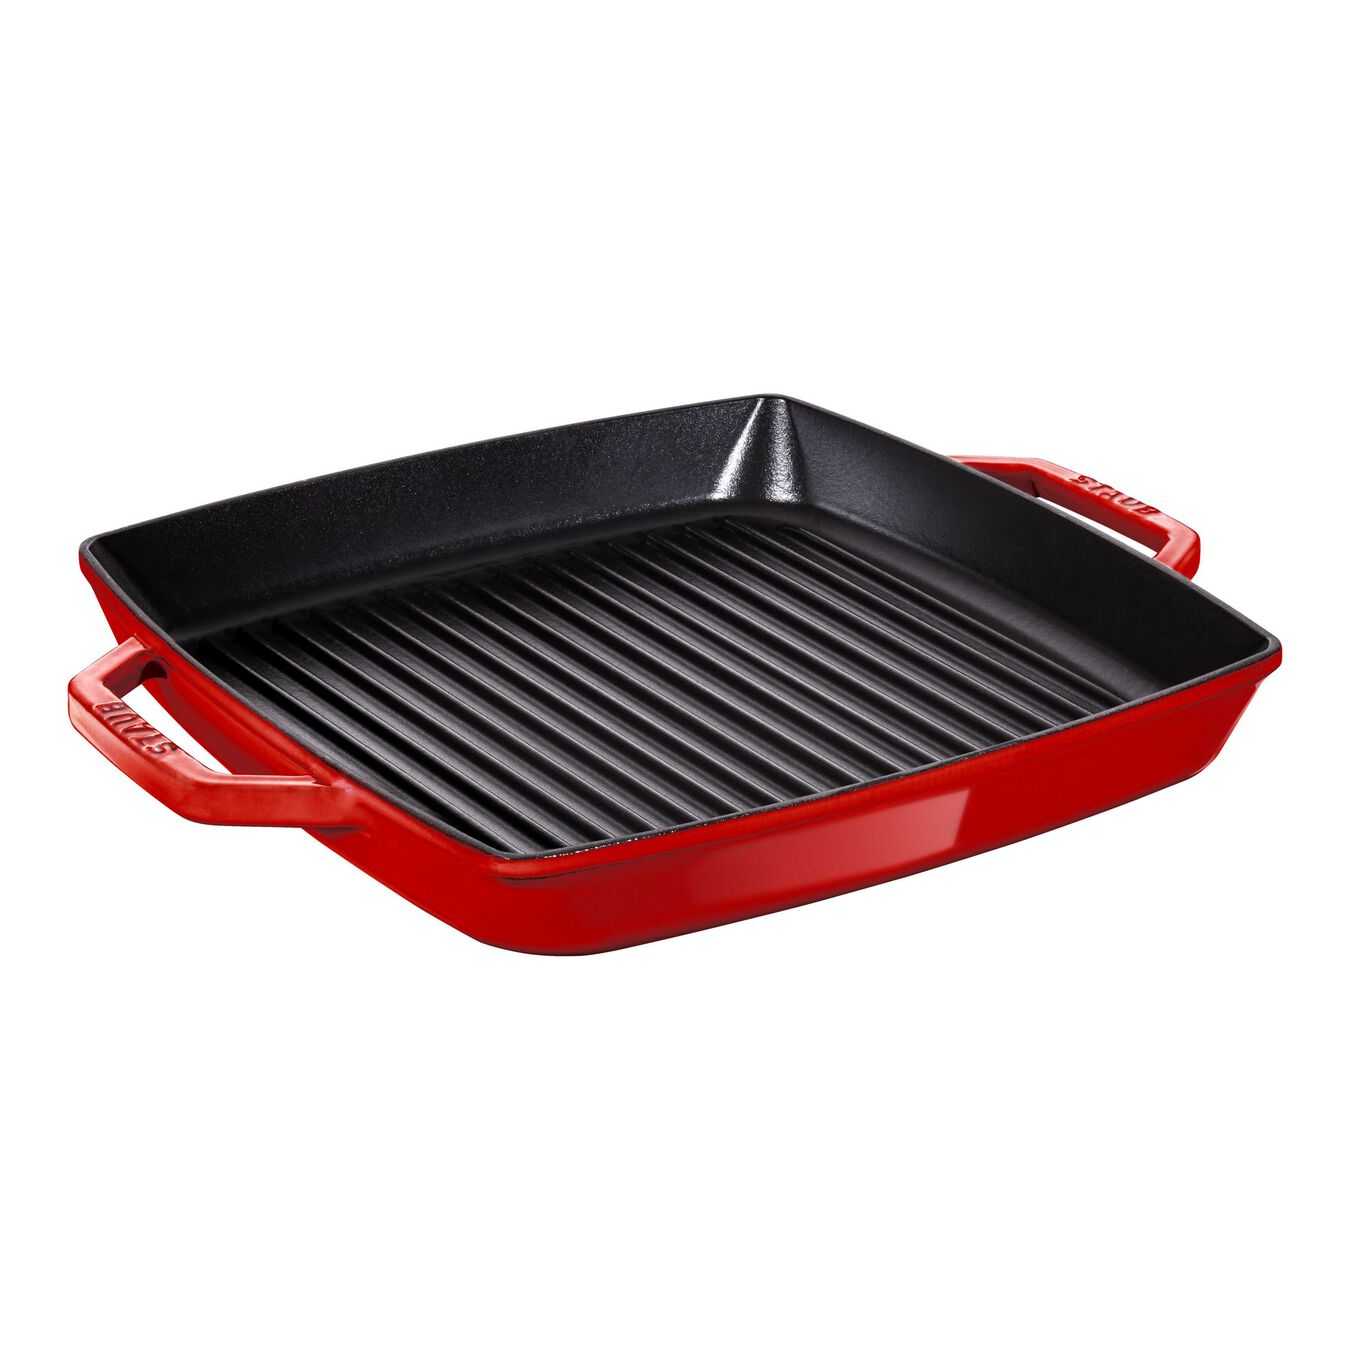 33 cm / 13 inch cast iron square Grill pan, cherry,,large 1